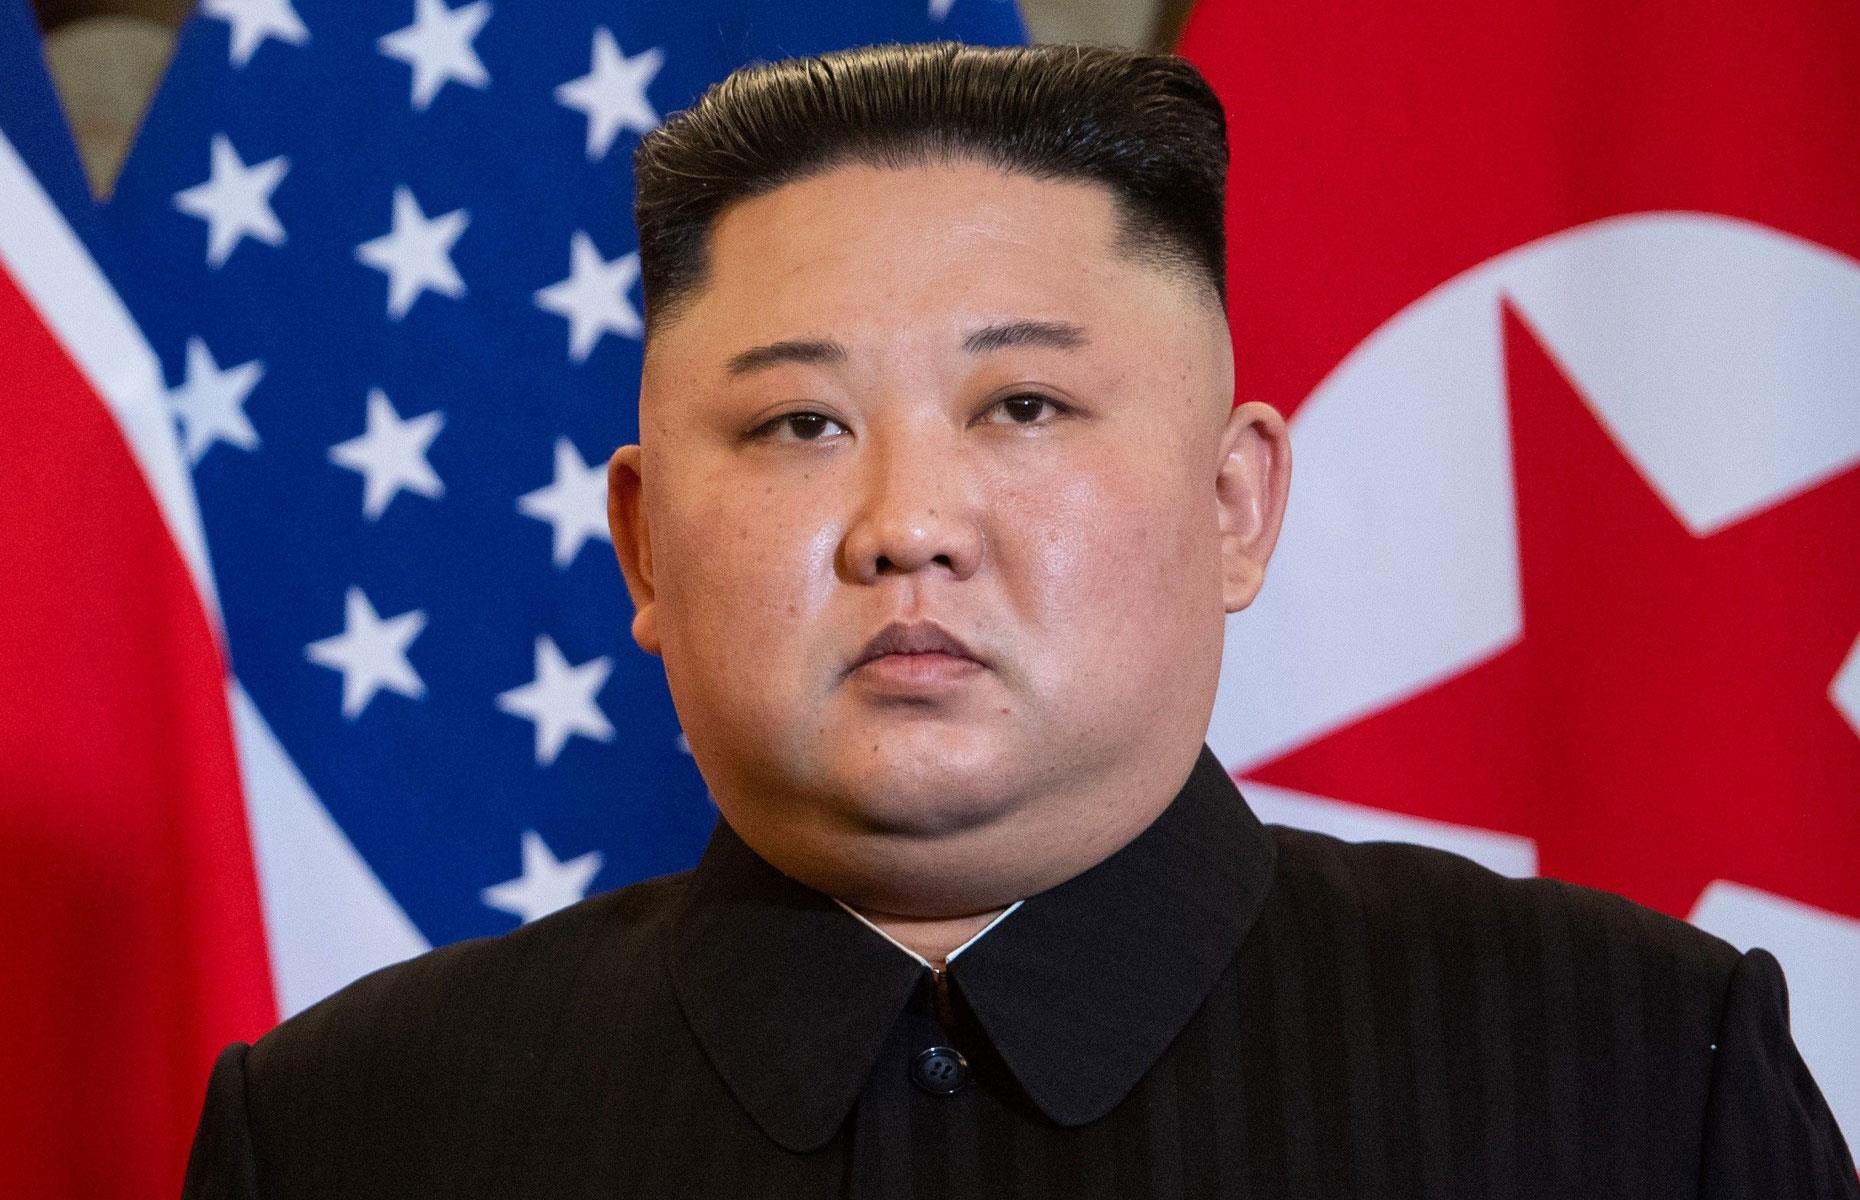 <p>North Korea's current head honcho Kim Jong-un rivals his father in barbarity and beats him when it comes to net worth. The supreme leader of the Hermit Kingdom, who reportedly enjoys the finer things in life from yachts and luxury cars to caviar and vintage wine, is said to have a fortune of $5 billion.</p>  <p><strong><a href="https://www.lovemoney.com/news/78162/what-north-korea-is-spending-a-fortune-on-may-shock-you">Discover what North Korea is spending a fortune on</a></strong></p>